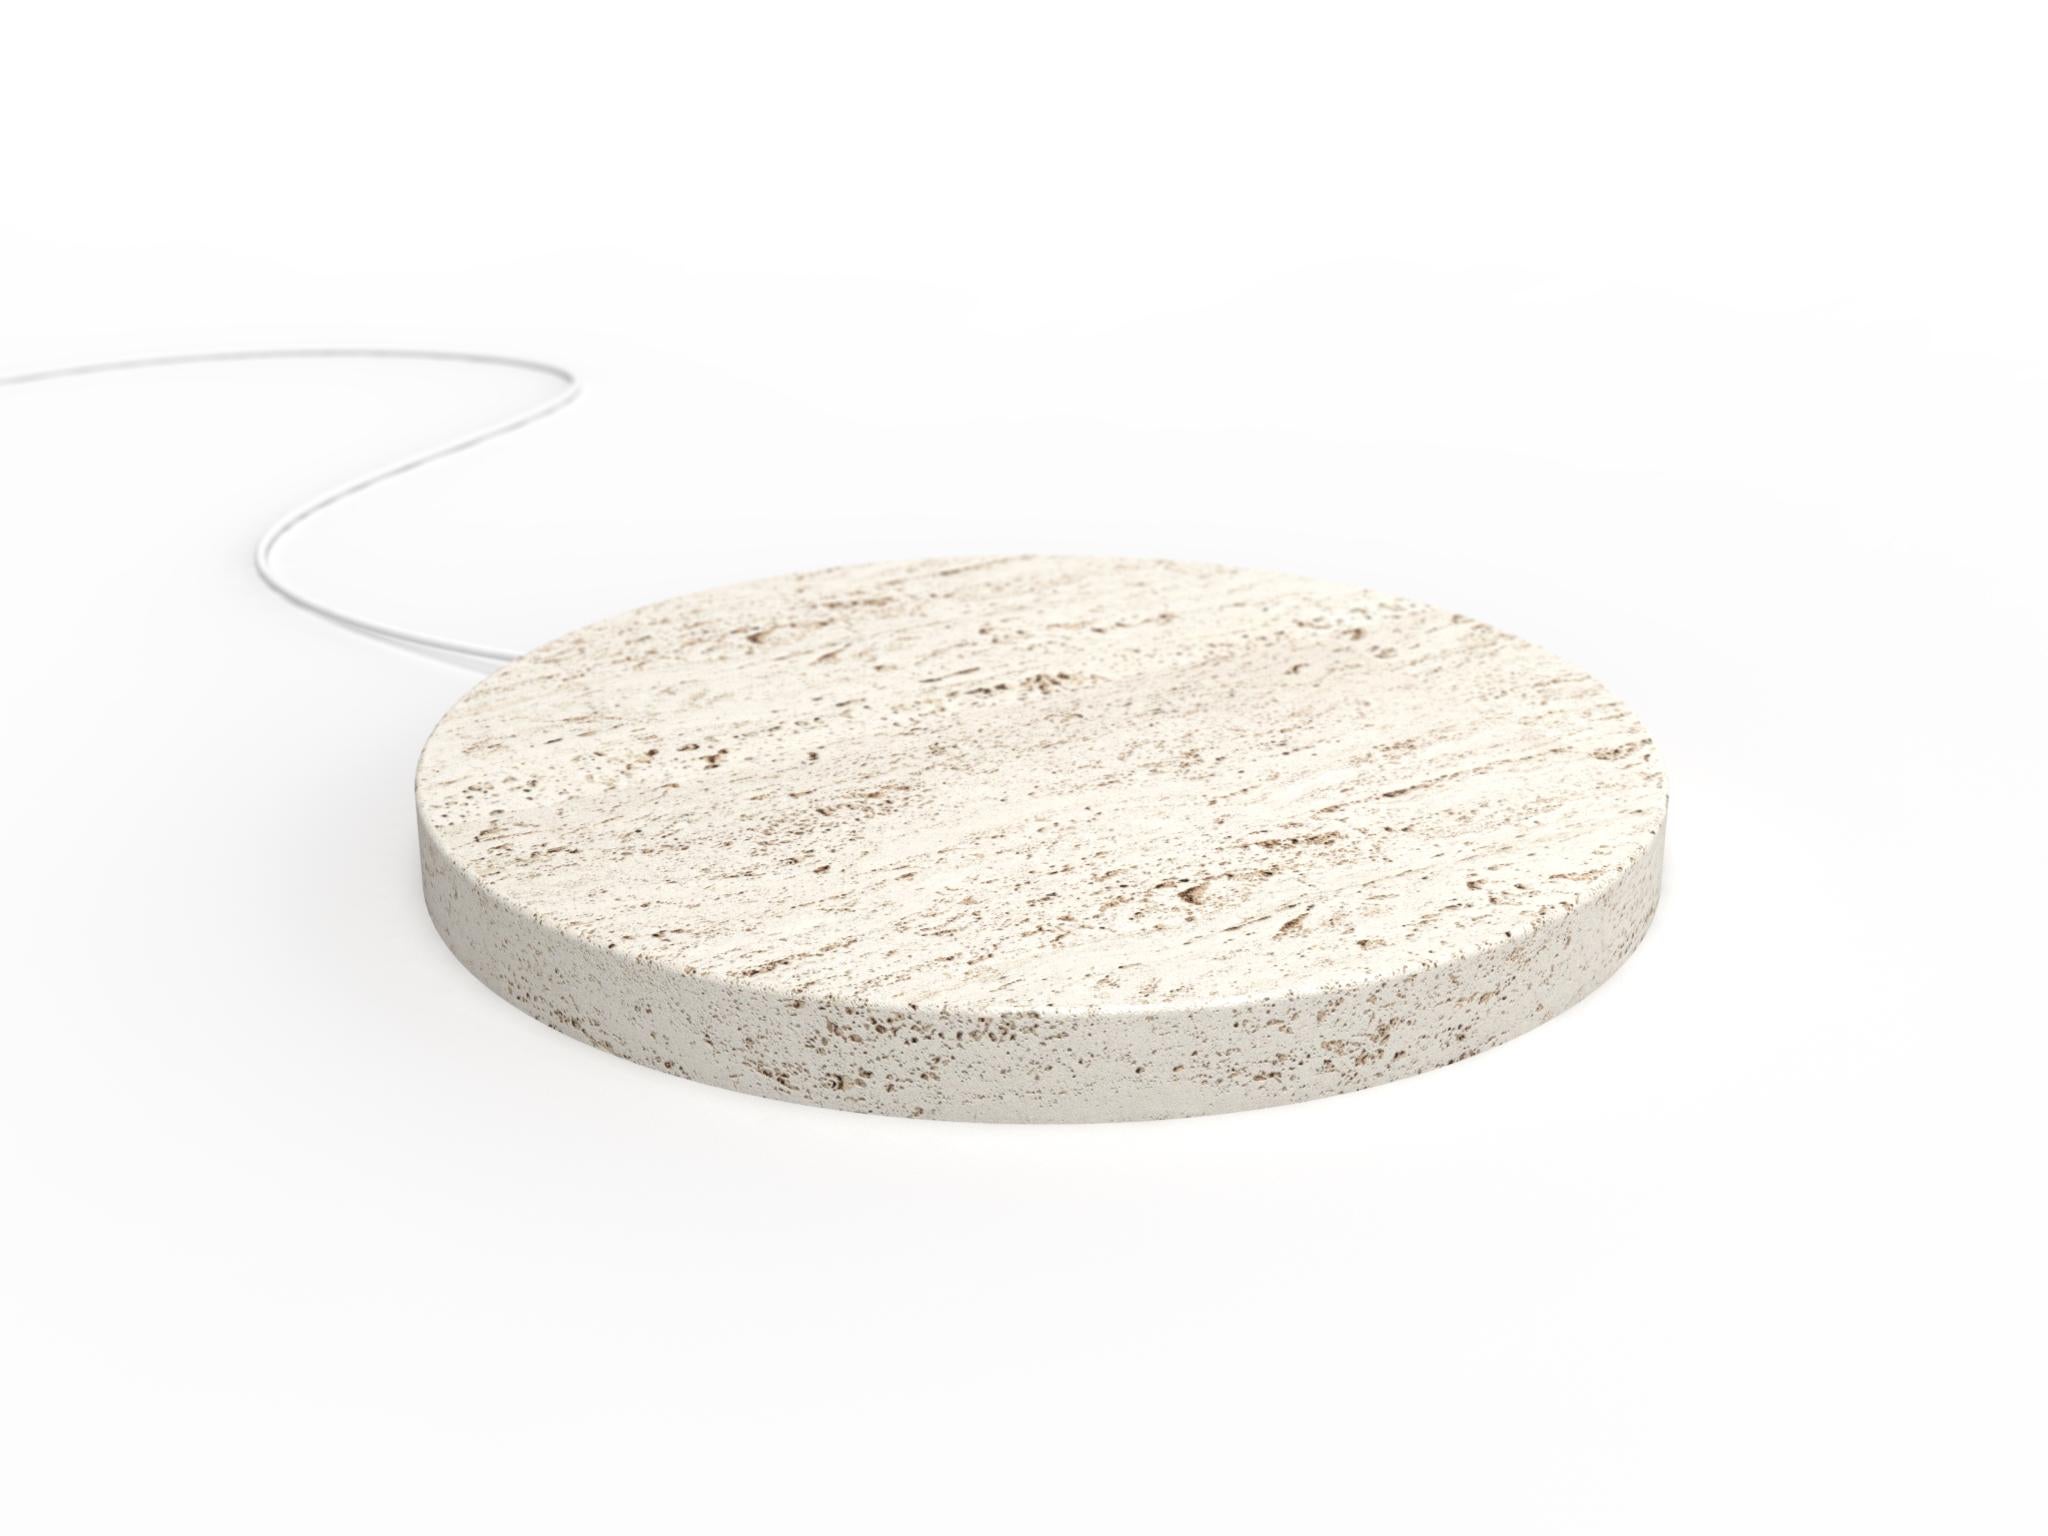 A travertine base,
that quickly charge your phone, with a touch of magic.
 
A circle, 
a stone, 
realized with the care that stone requires.

A powerful wireless charging technology ensures an efficient and reliable power delivery.

The result is a